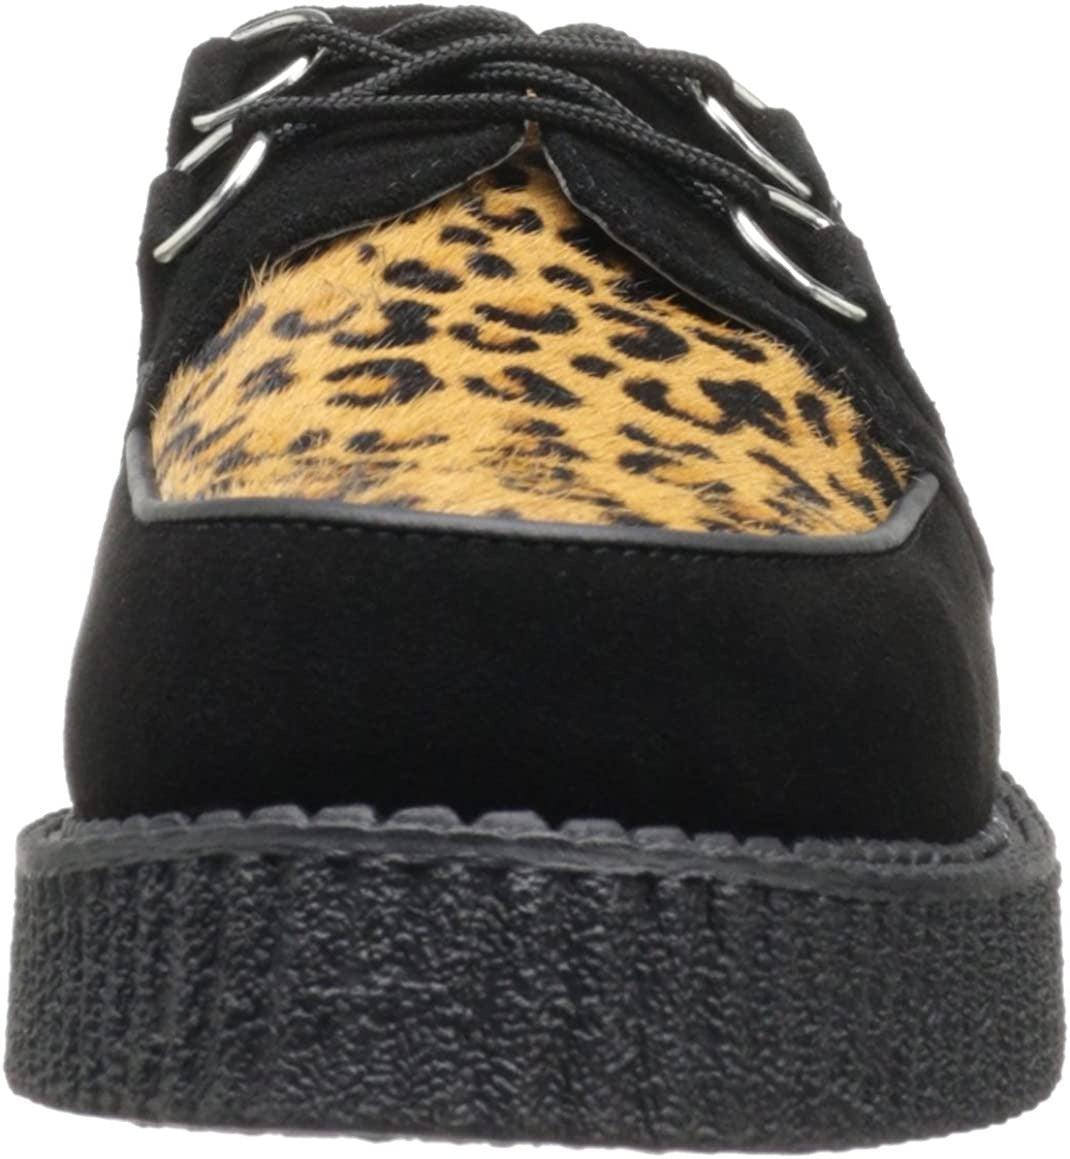 T.U.K. A8142 TUK Black / Leopard Cowhair Low Sole Creepers Womens Size US 6 EU 37 - SVNYFancy